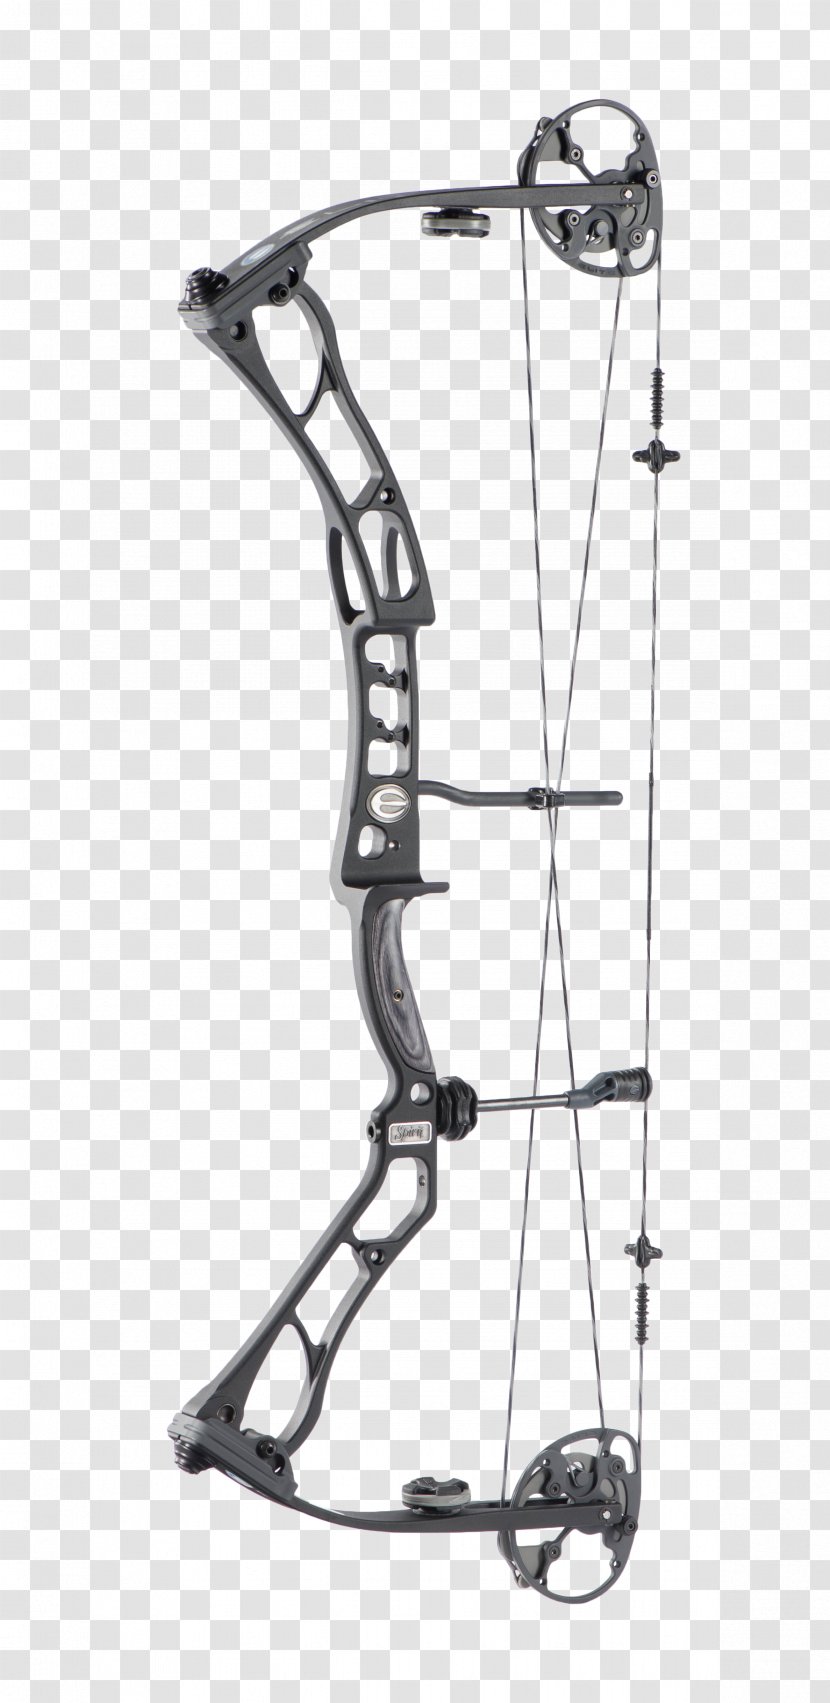 Archery Country Impulse Bow And Arrow Compound Bows - Black Transparent PNG